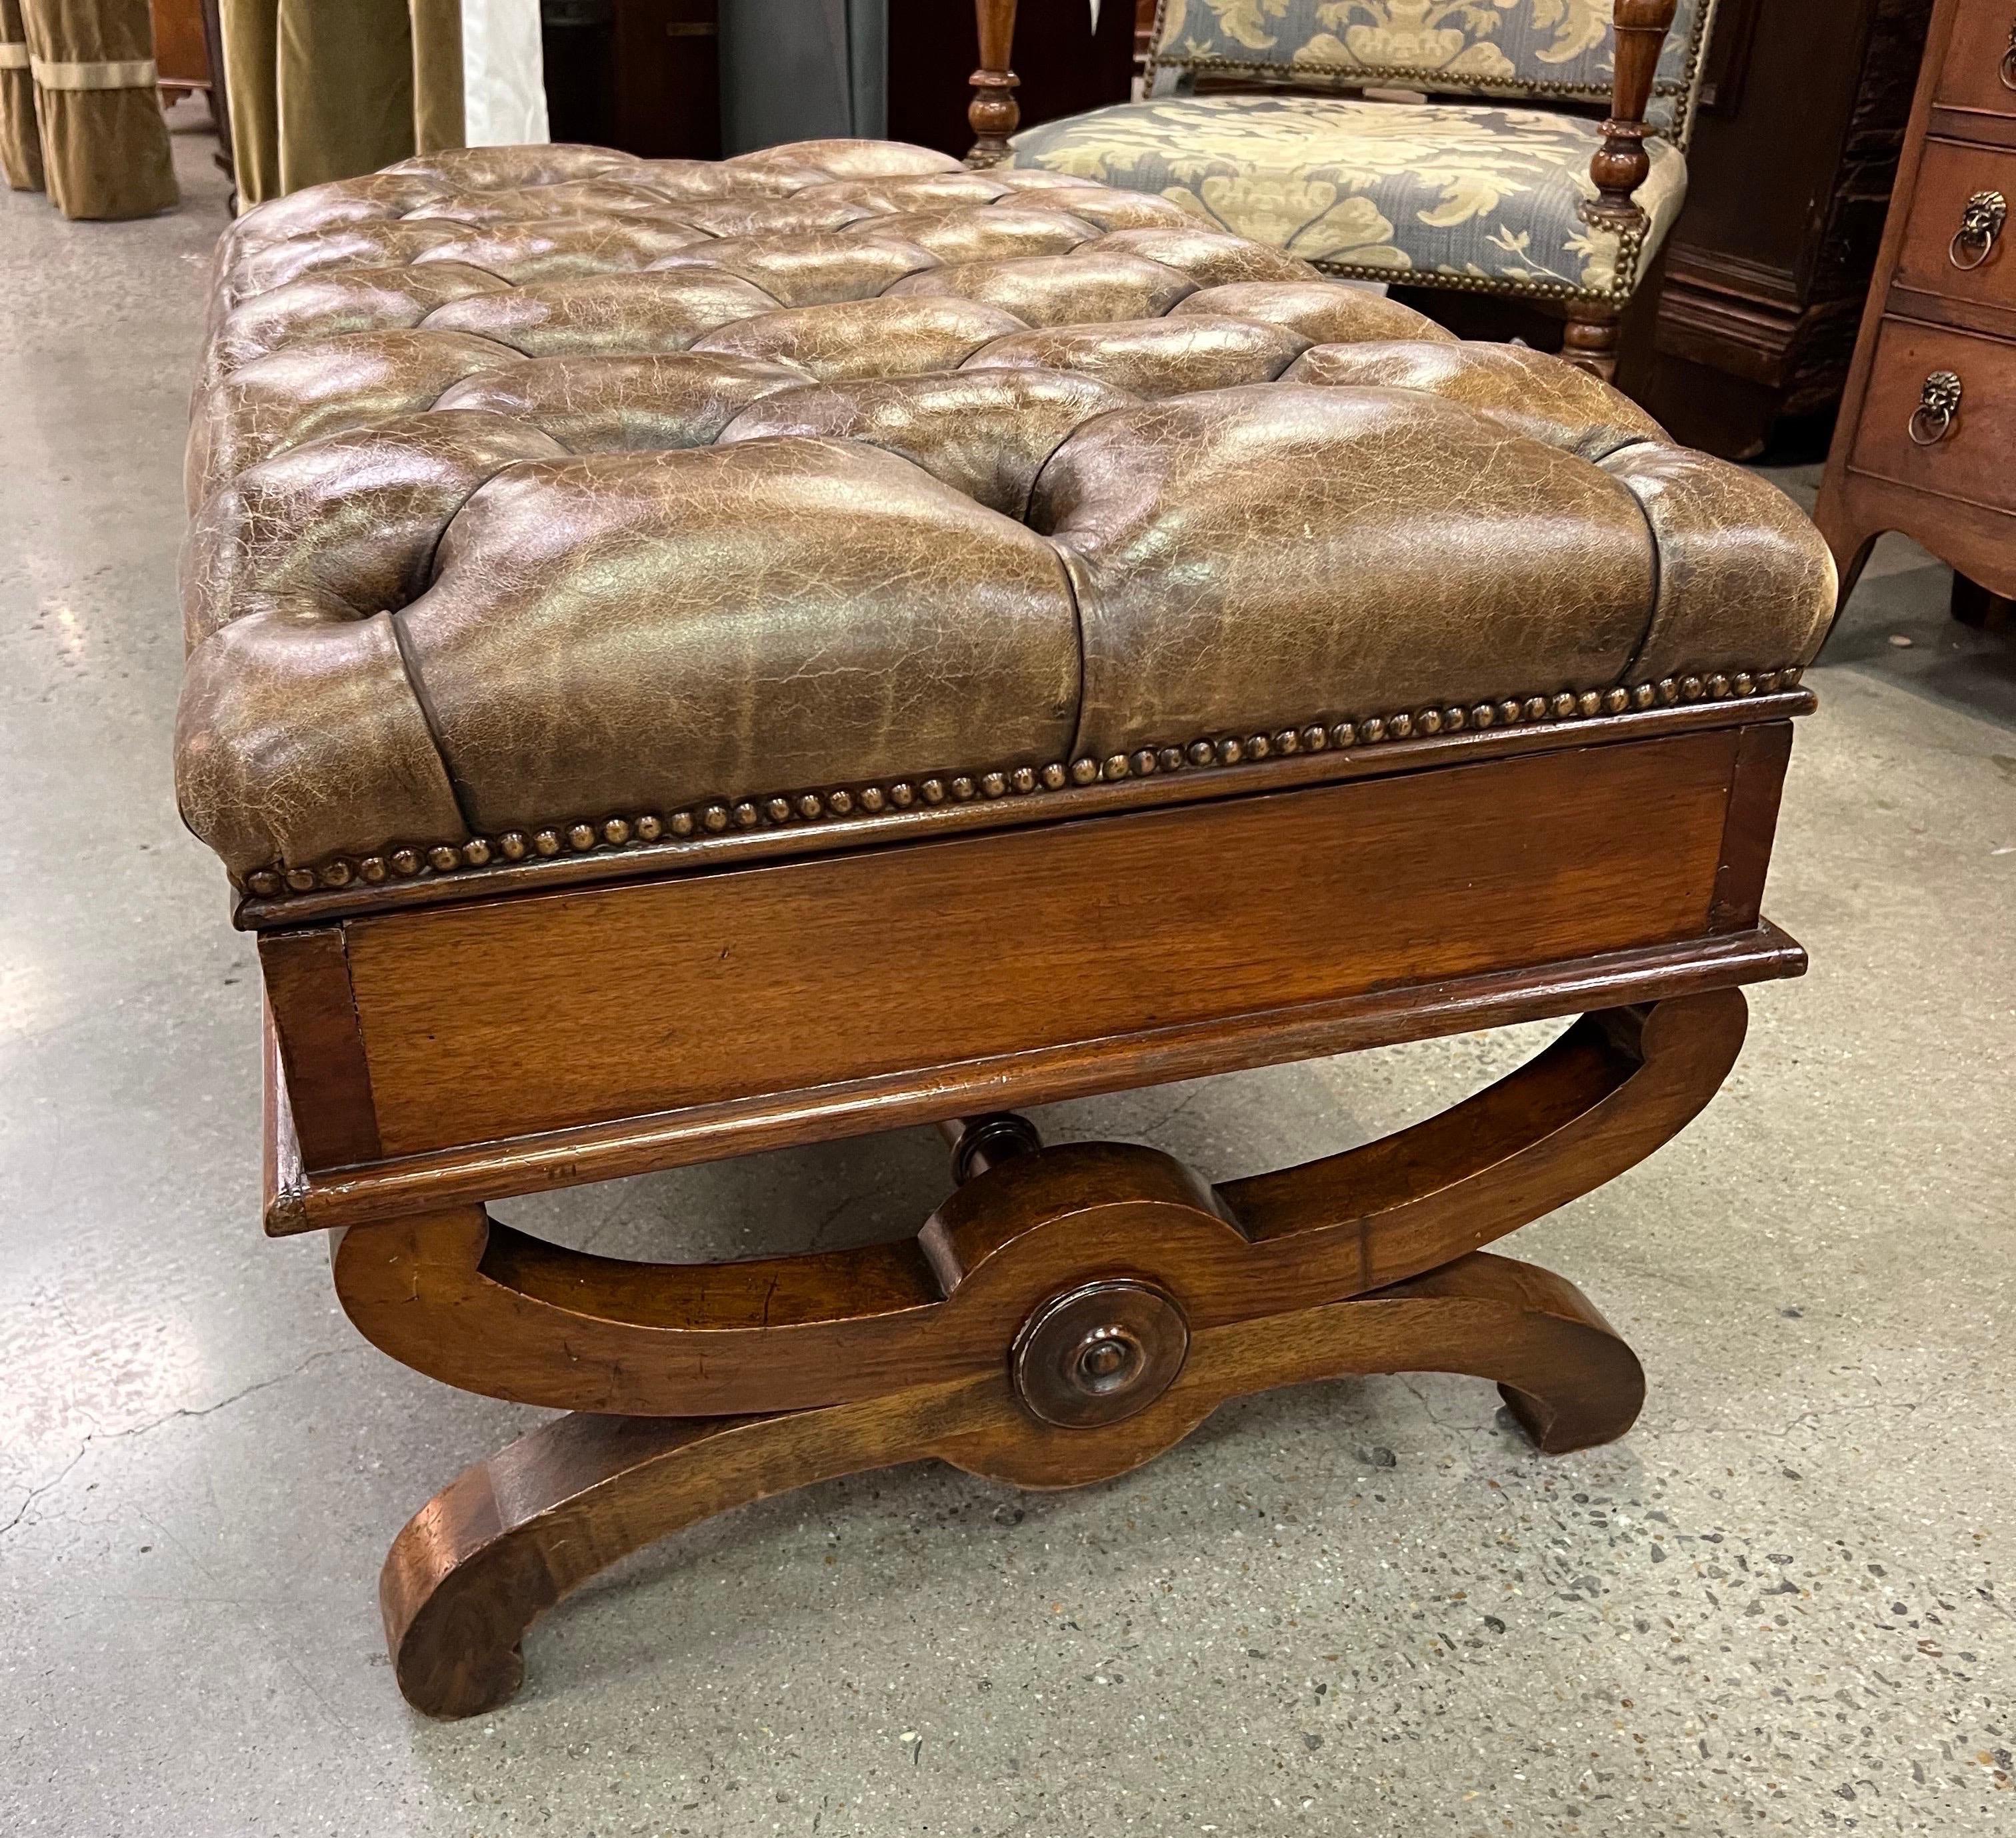 Sharp 19th century English tufted leather and mahogany ottoman with storage. Small coffee table size.